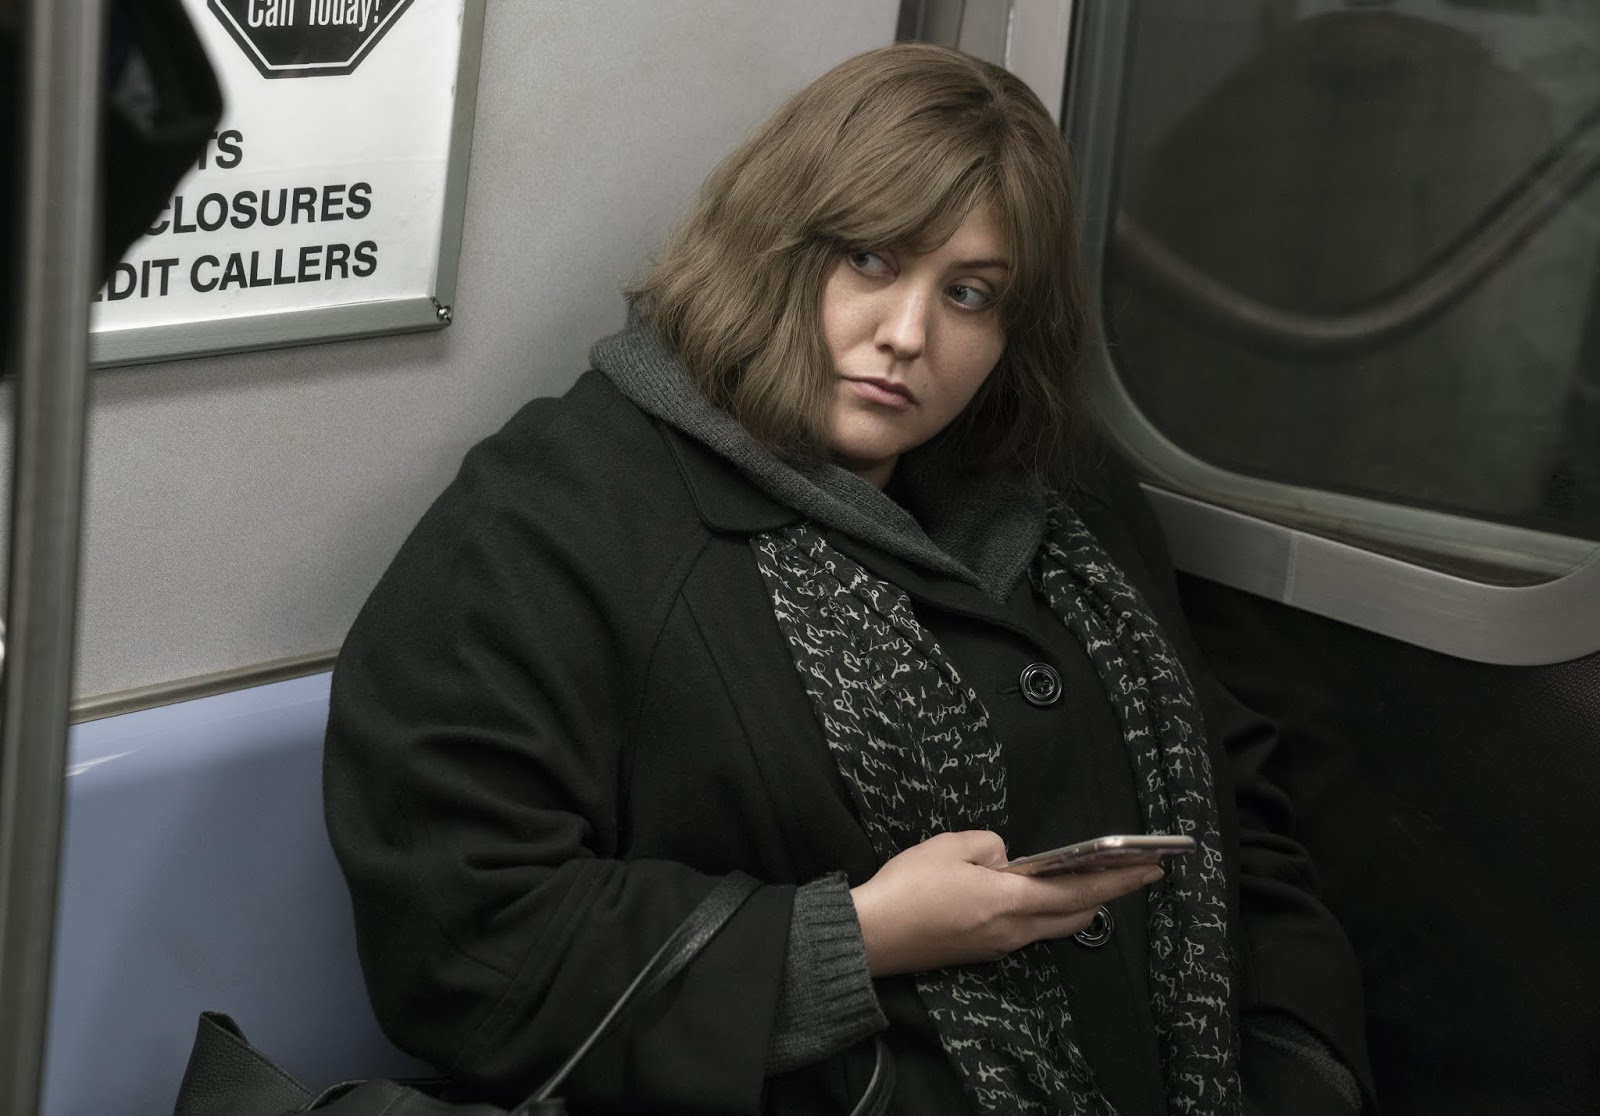 DIETLAND Series Trailers, Featurette, Images and Poster | The ...